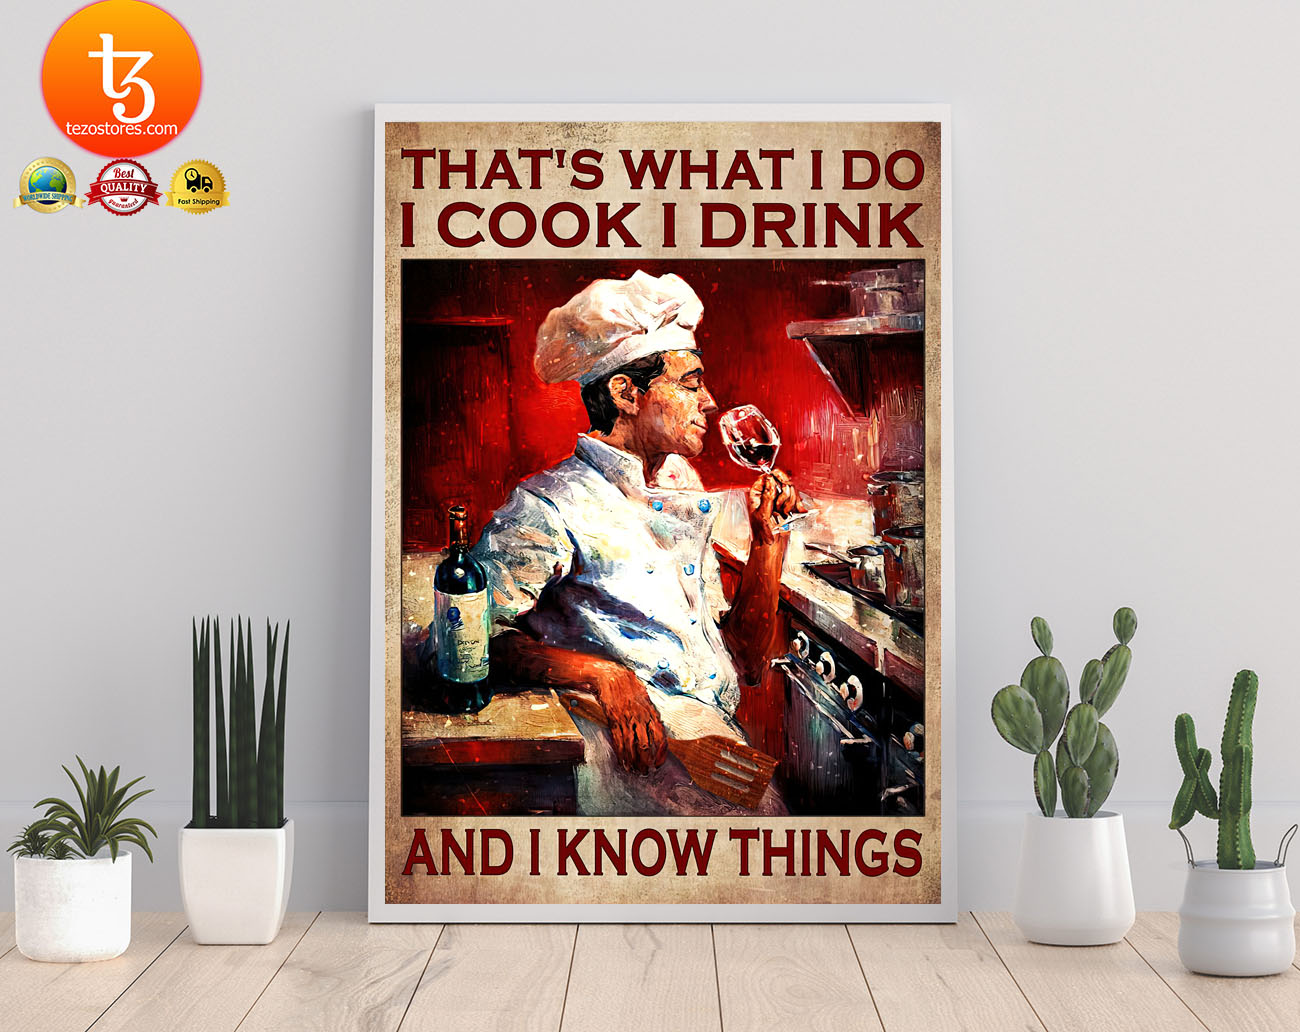 Thats what I do I cook I drink and I know things poster2